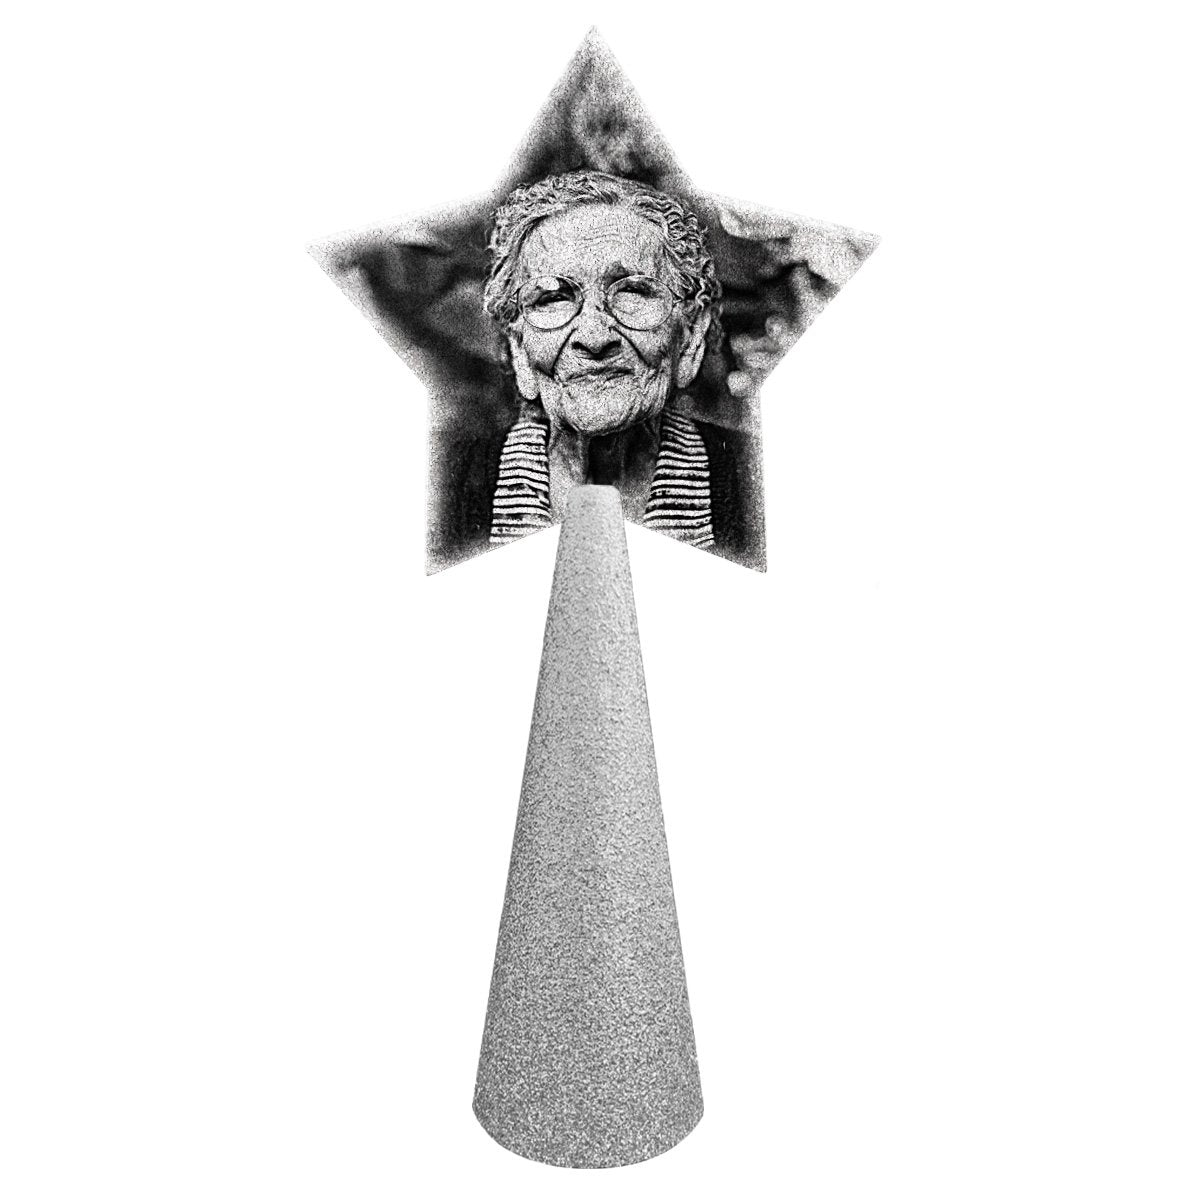 custom tree topper - black and white sample photo of smiling old woman on custom christmas tree topper - star photo on silver glitter cone - double-sided front